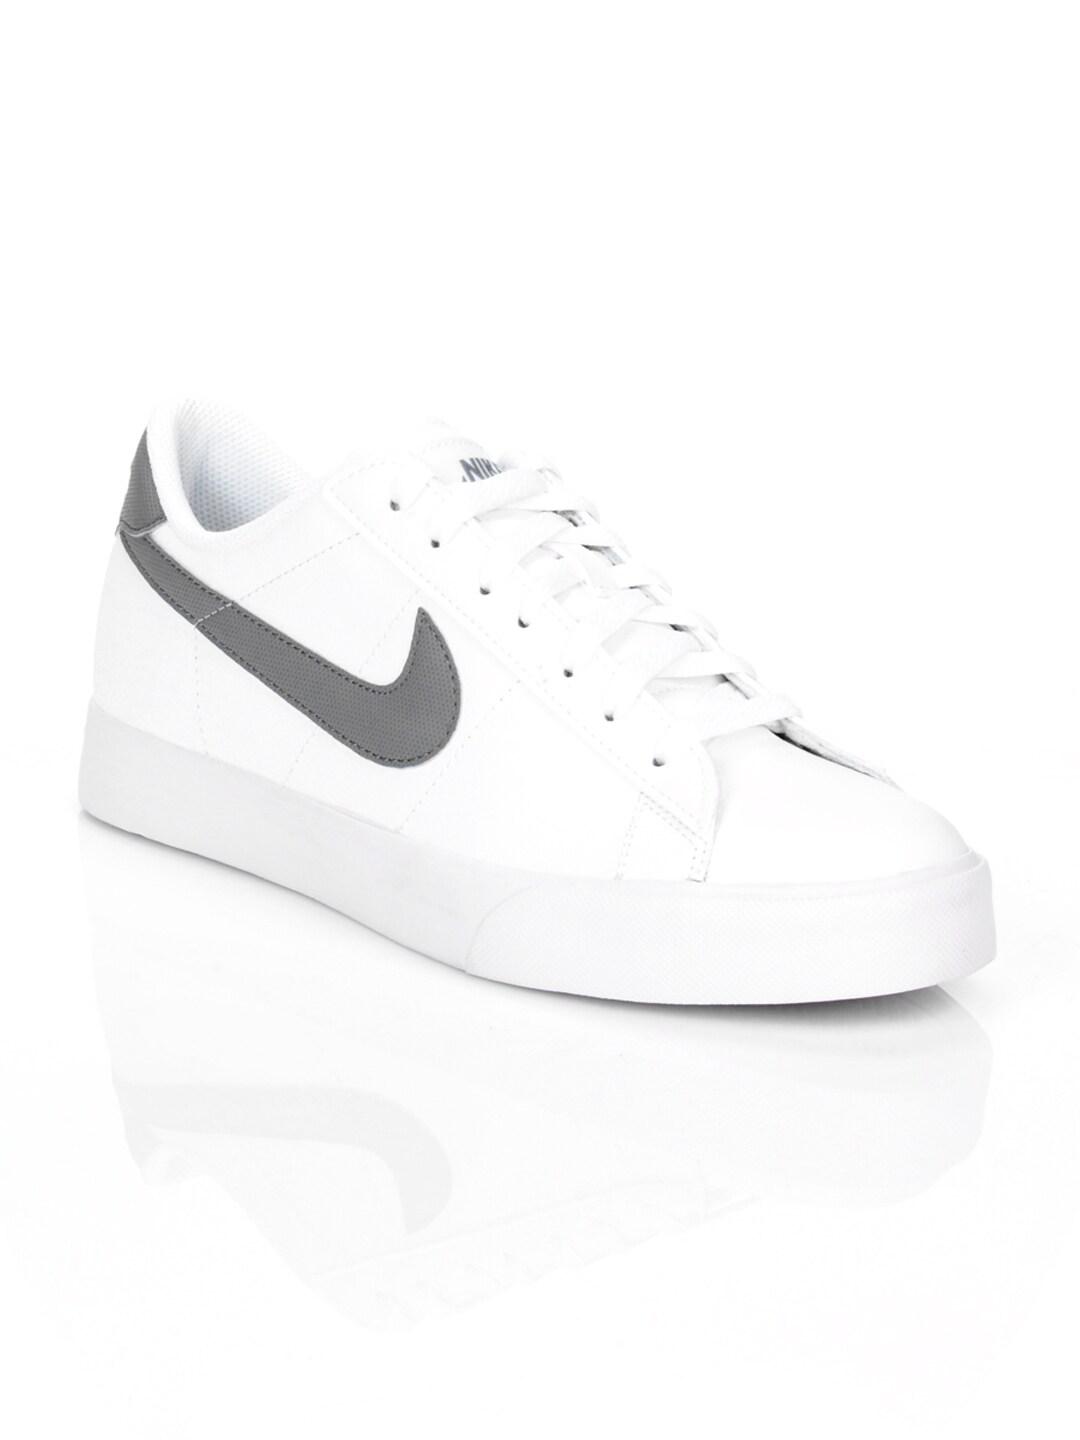 Nike Men Sweet Classic Leather White Shoes